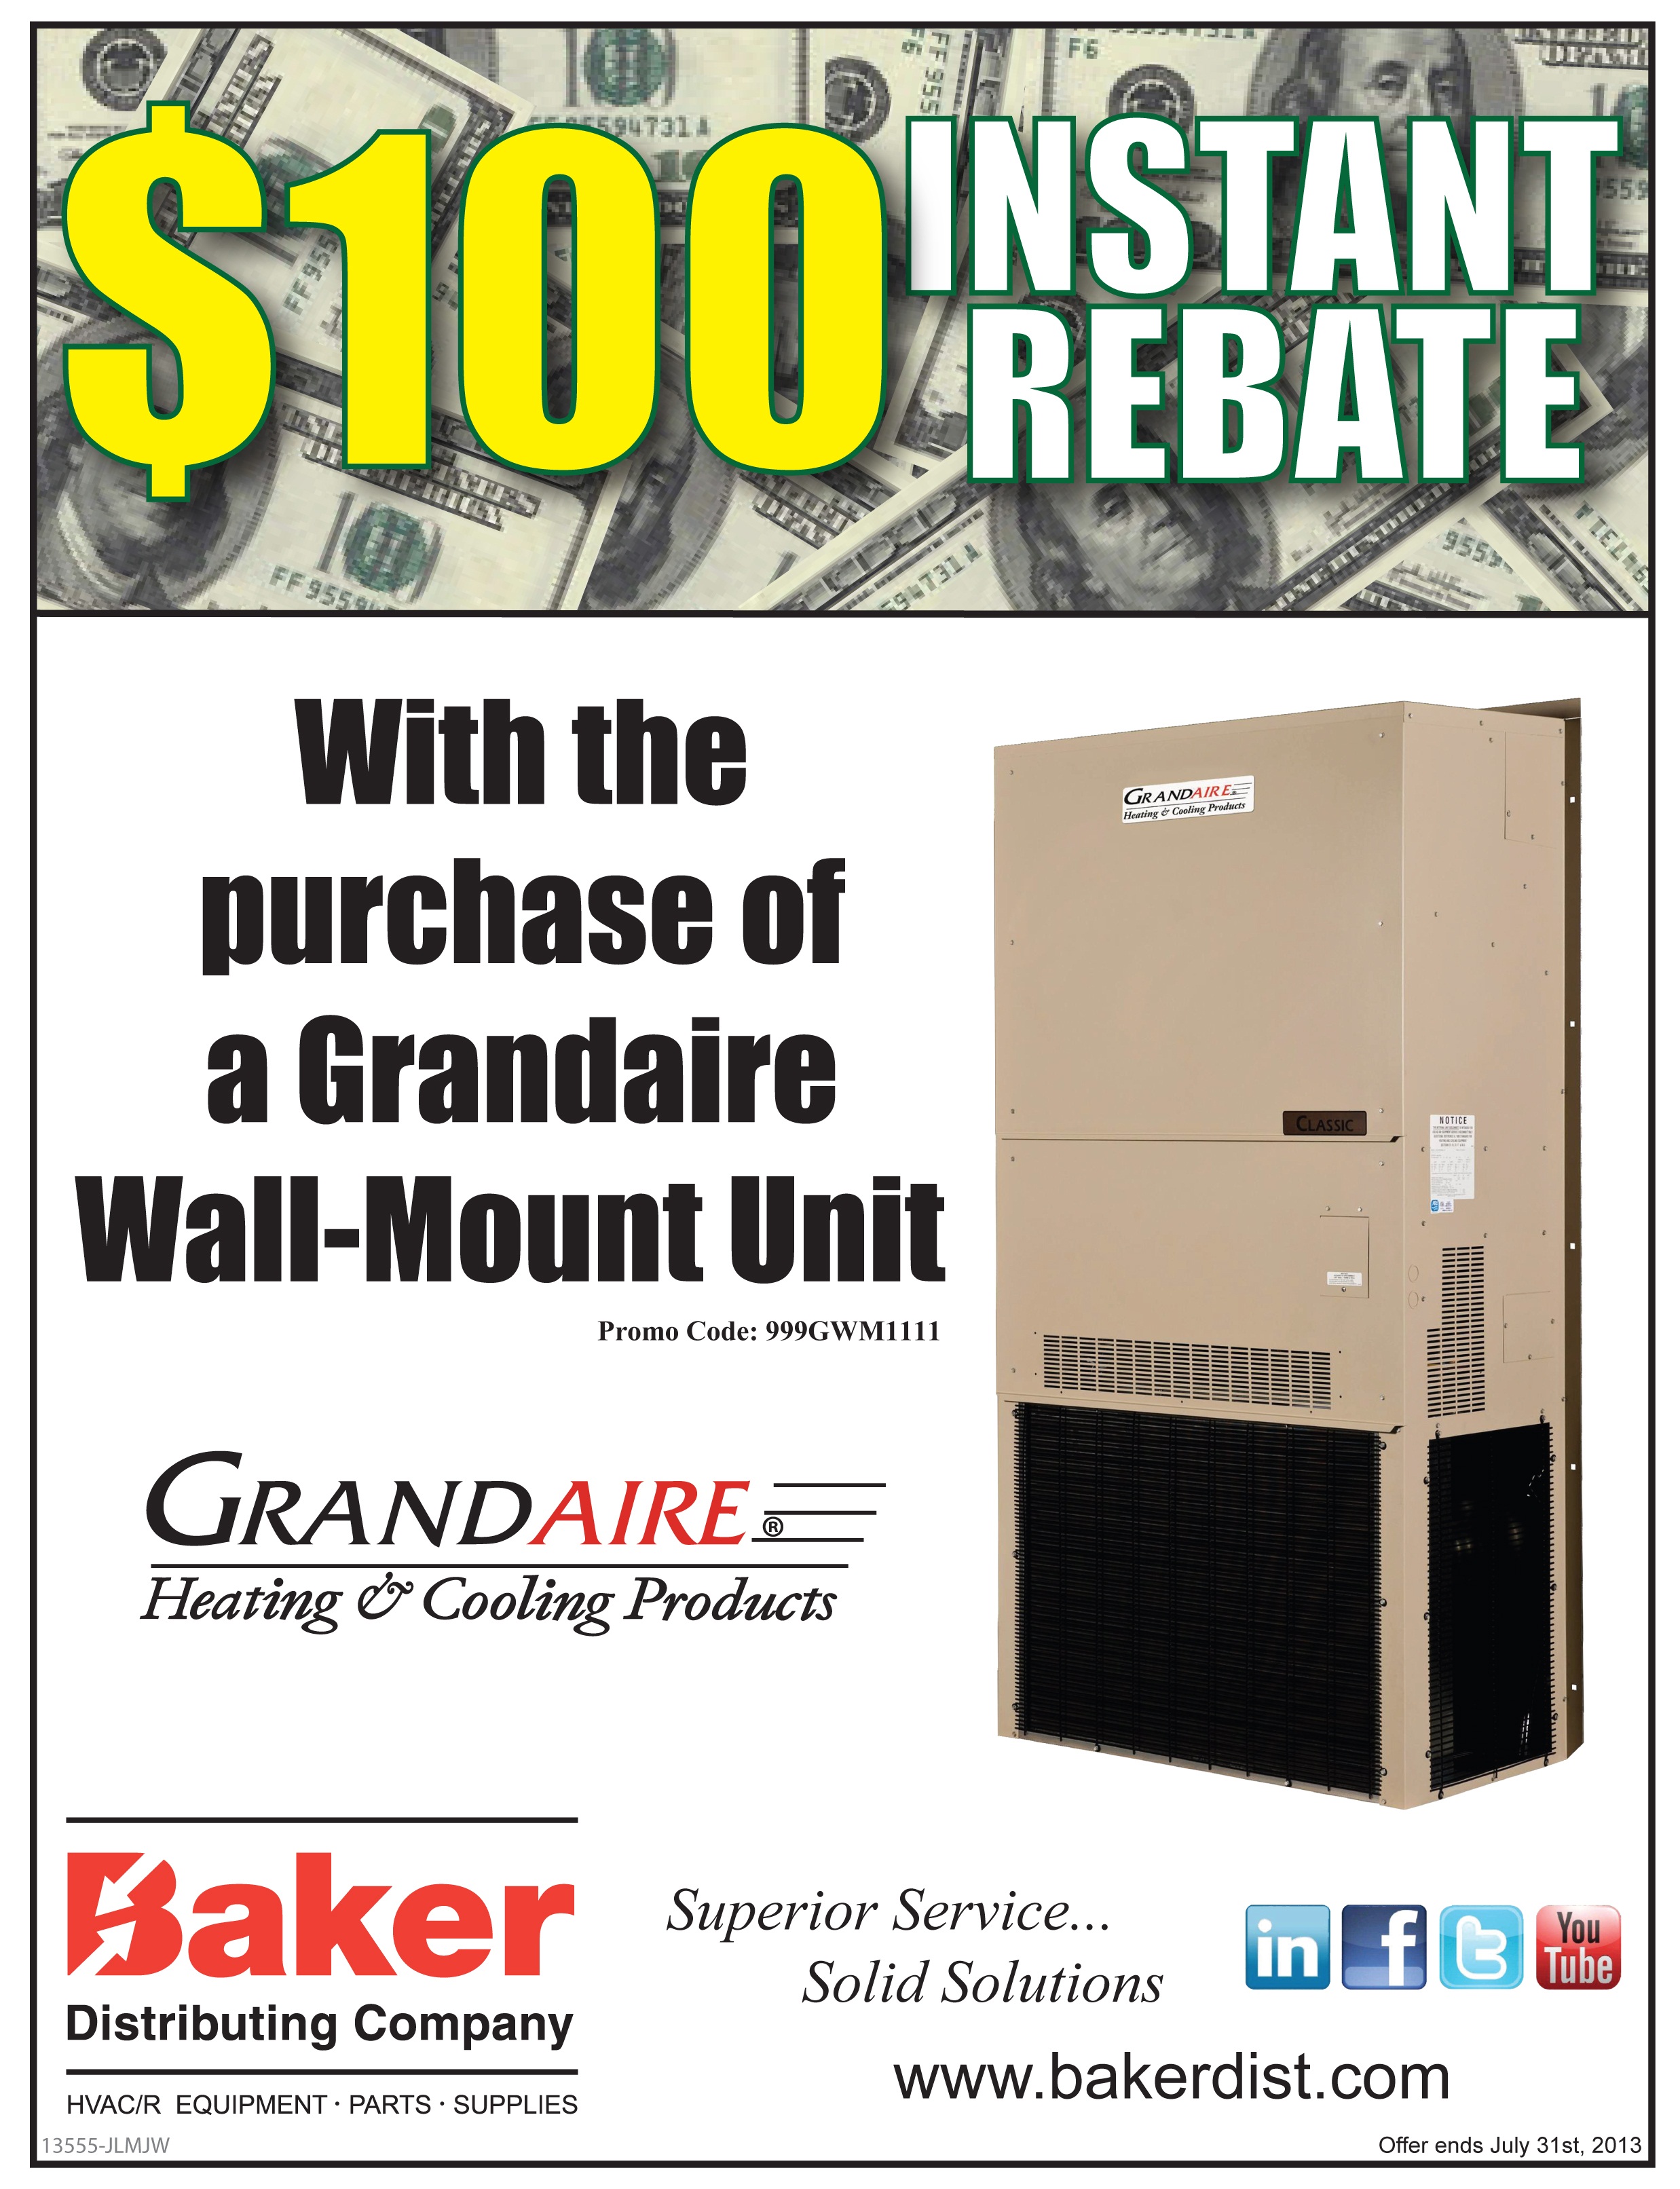 100-instant-rebate-from-baker-distributing-company-the-successful